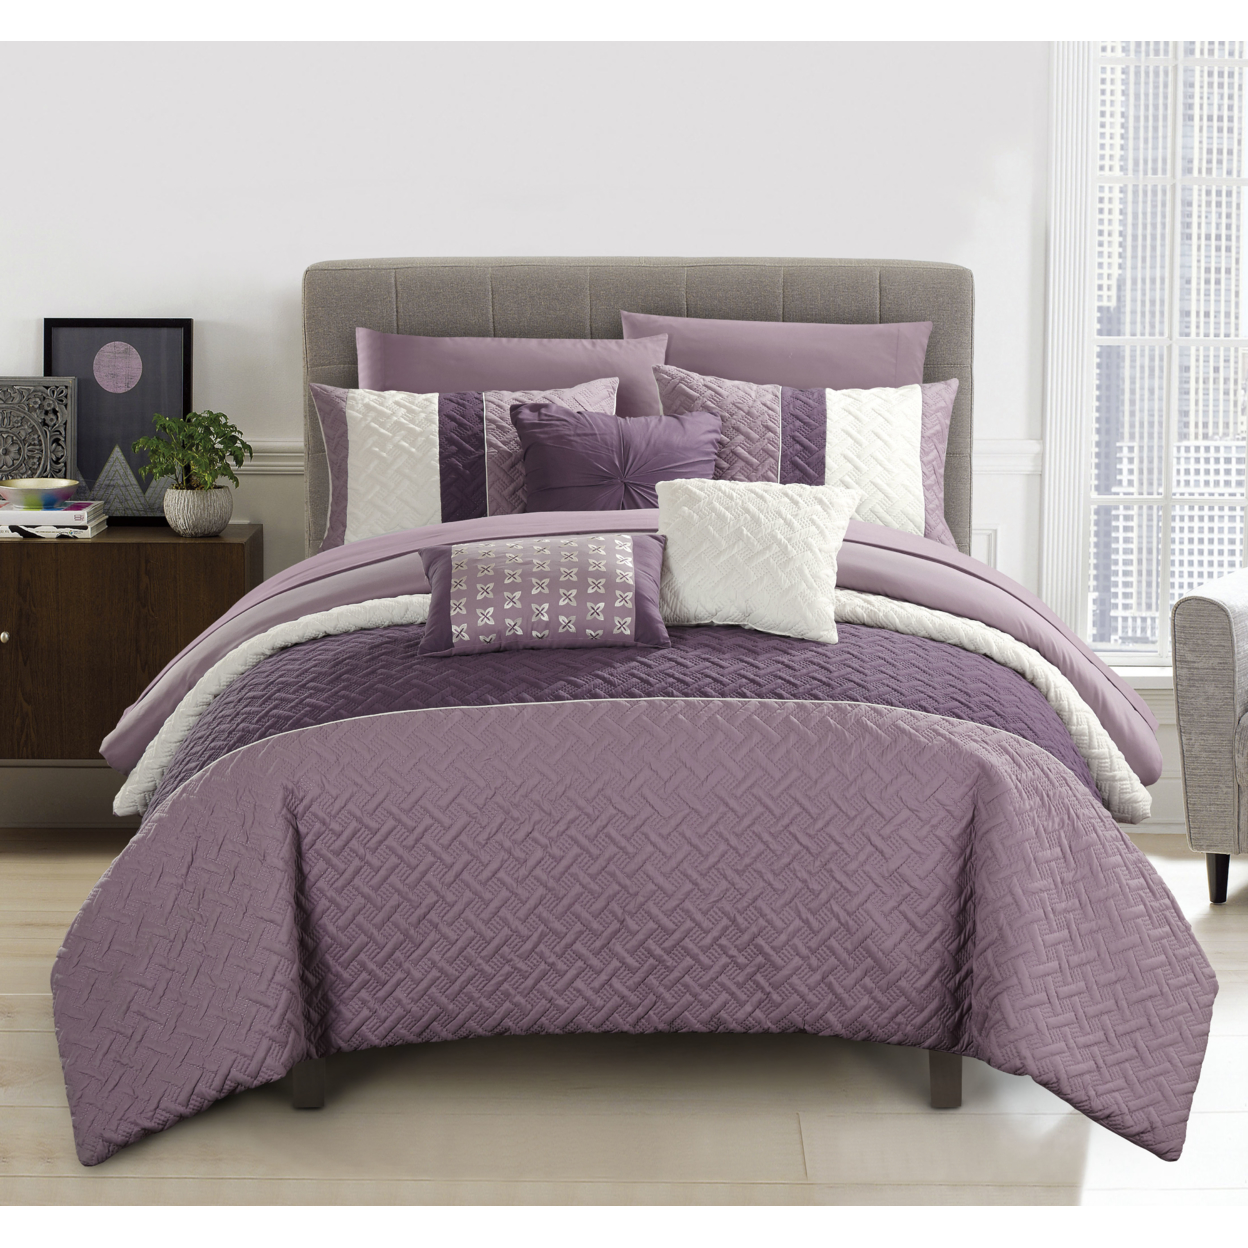 Chic Home Shaila 10 or 8 Piece Comforter Set Color Block Quilted Embroidered Design Bed in a Bag Bedding - Plum, Queen - queen purple